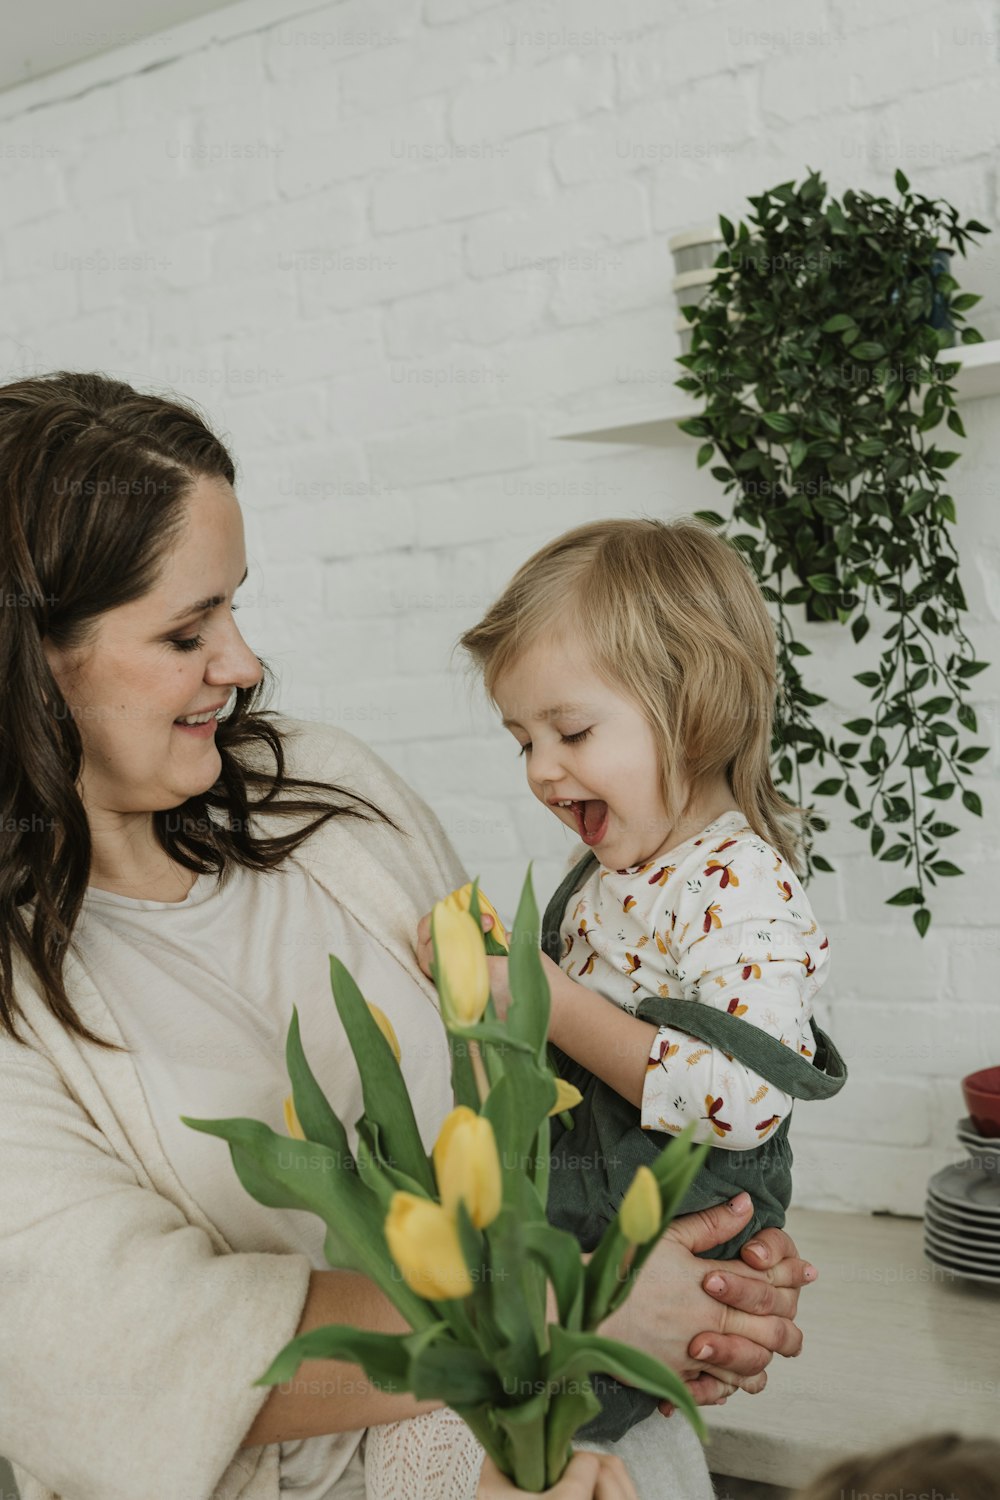 a woman holding a child and a vase of flowers